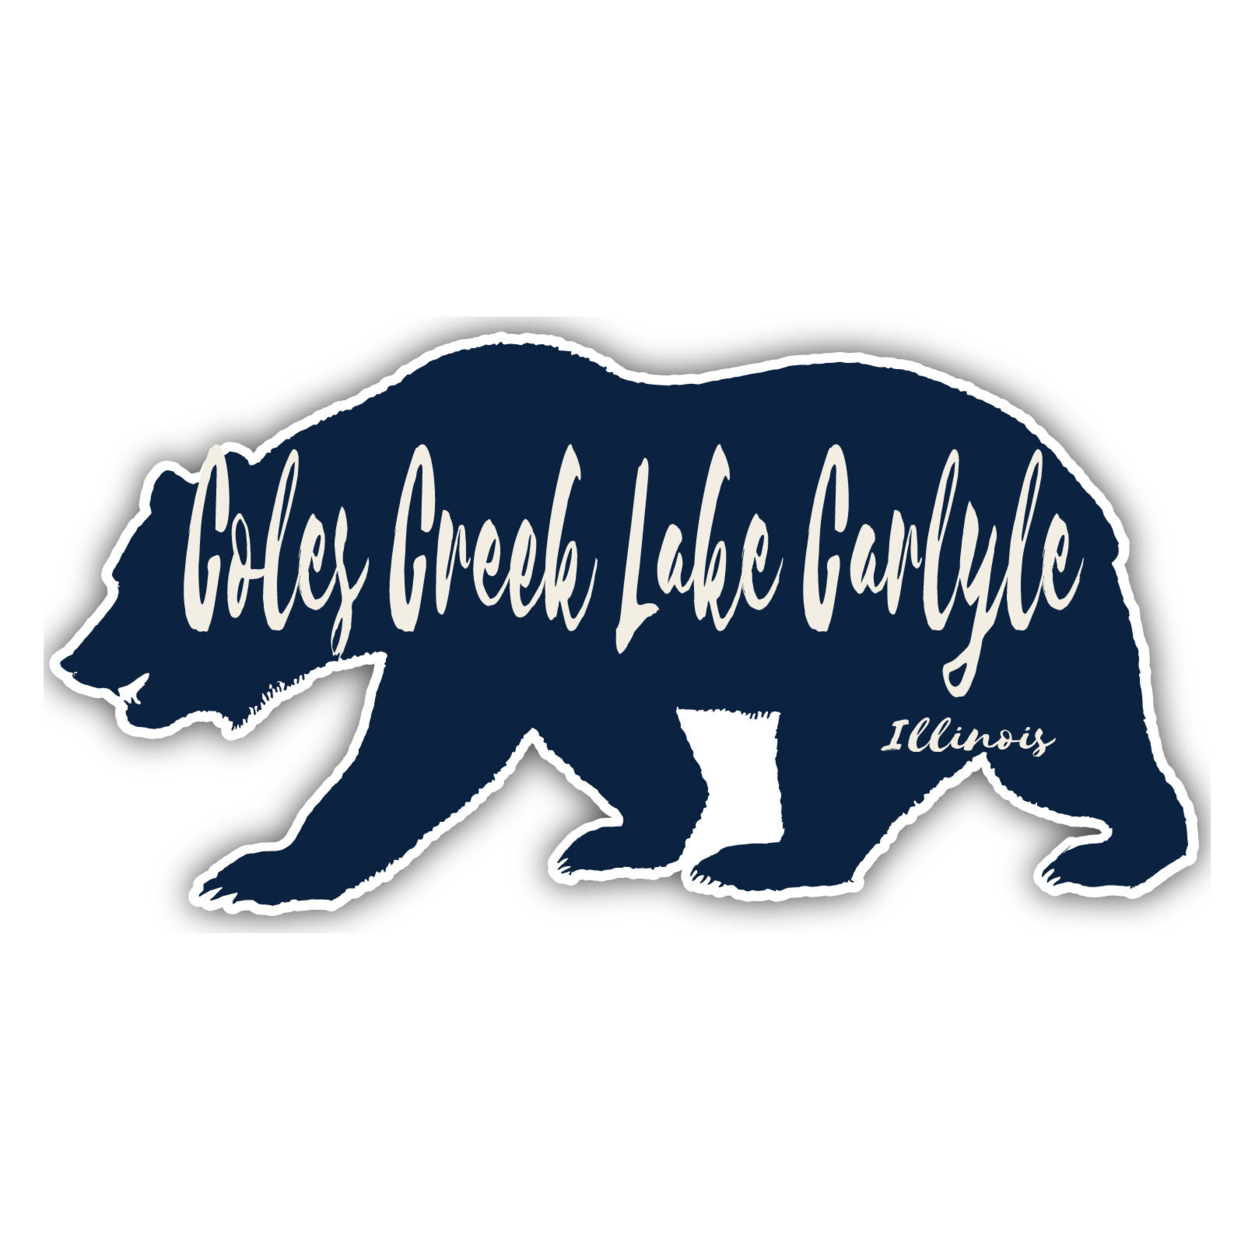 Coles Creek Lake Carlyle Illinois Souvenir Decorative Stickers (Choose Theme And Size) - 4-Pack, 8-Inch, Bear